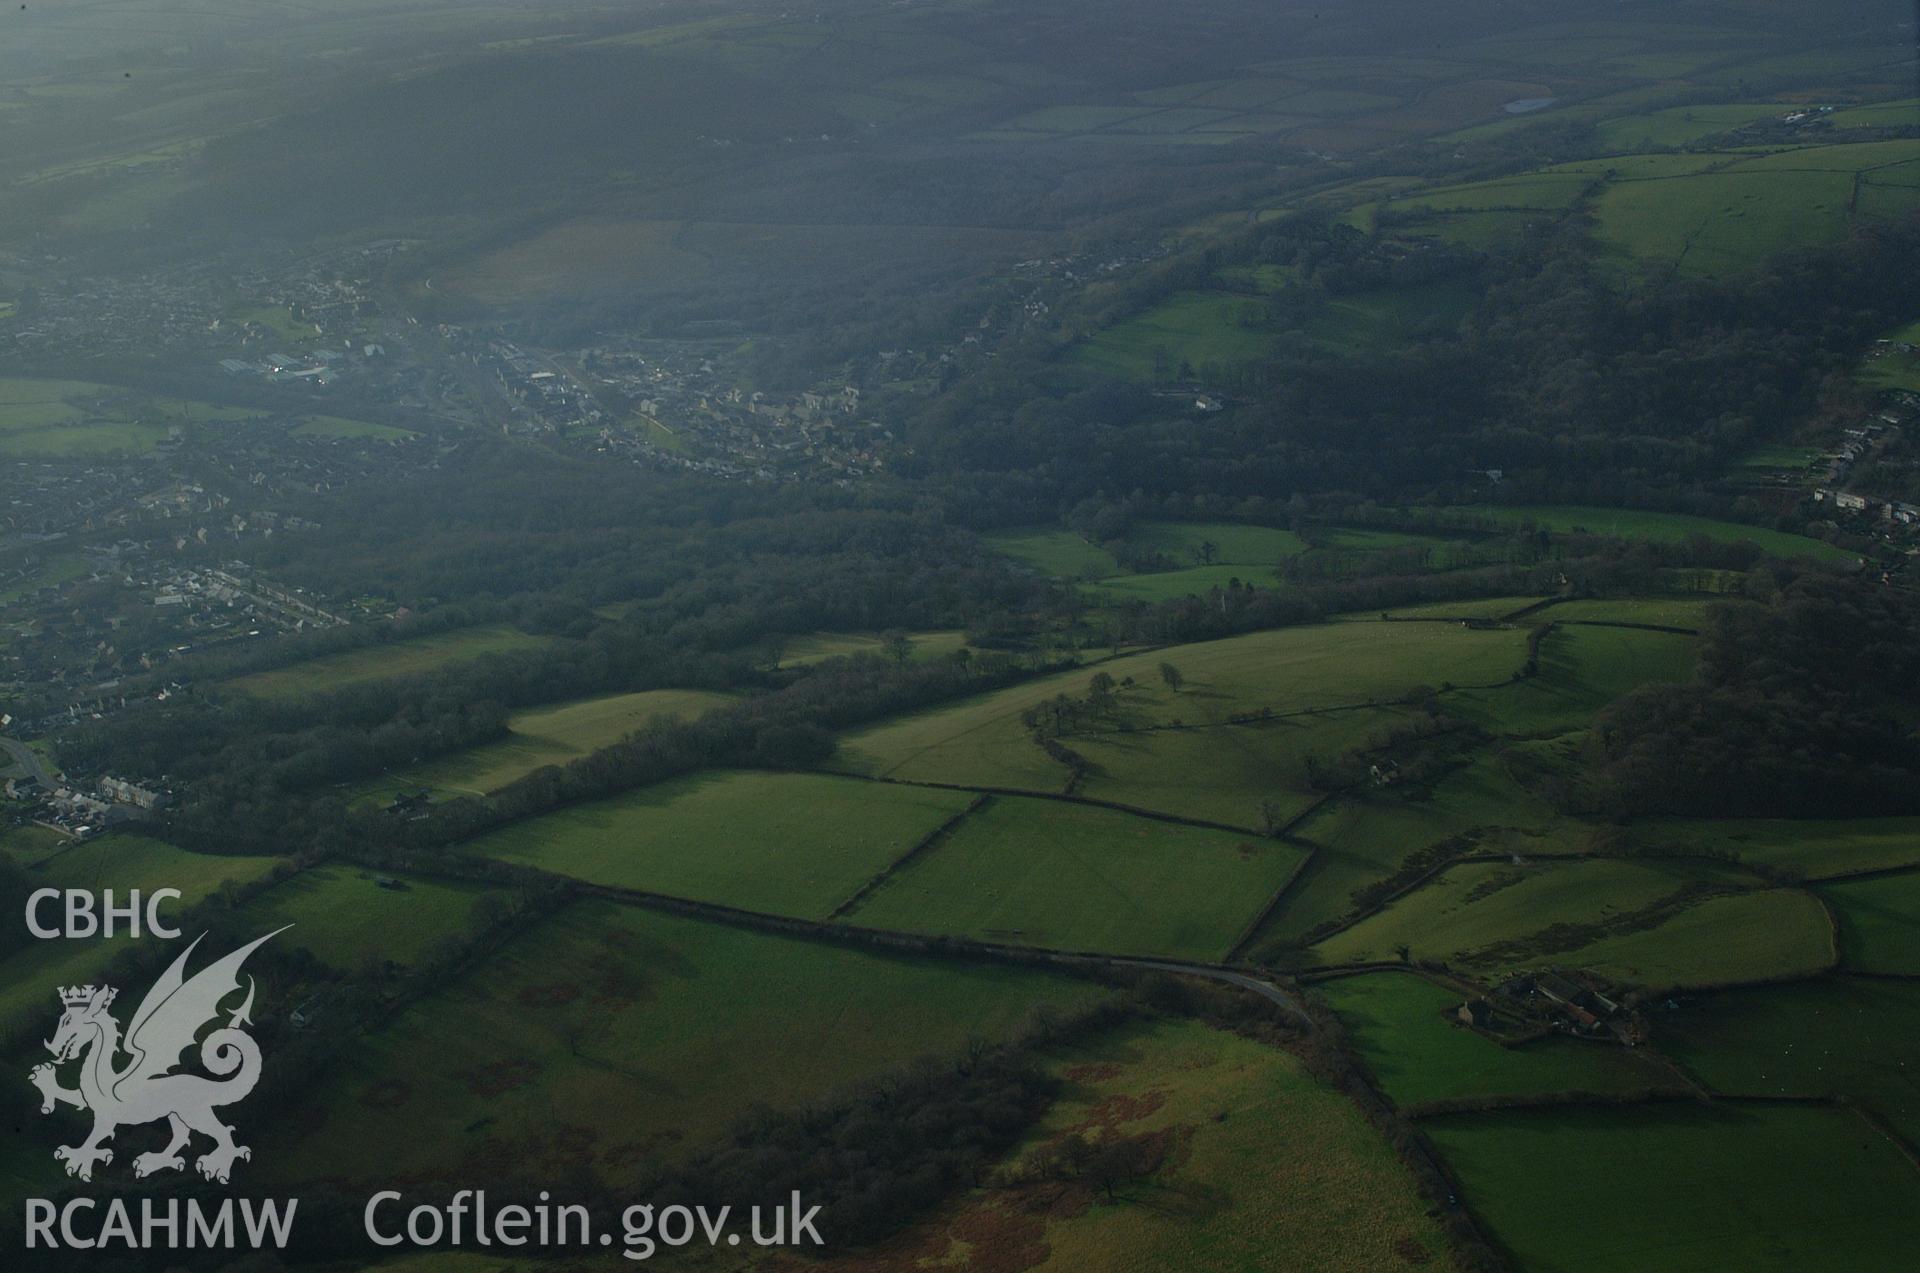 RCAHMW colour oblique aerial photograph of Bryngarw taken on 13/01/2005 by Toby Driver